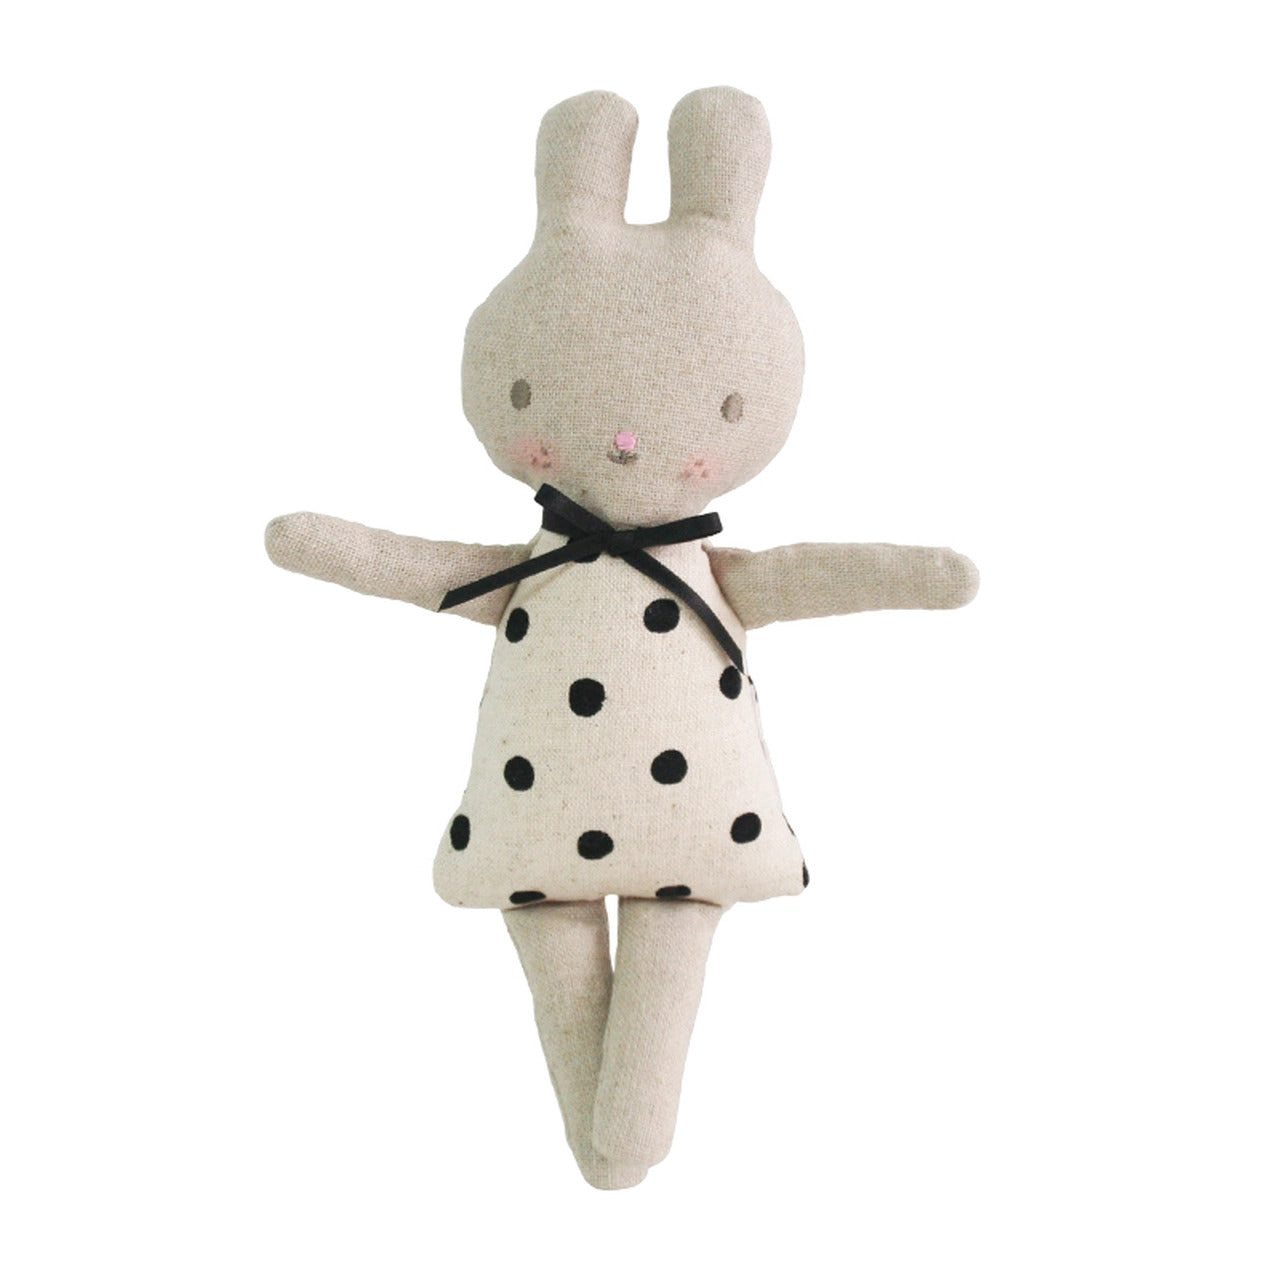 Linen oatmeal coloured bunny toy with black dots